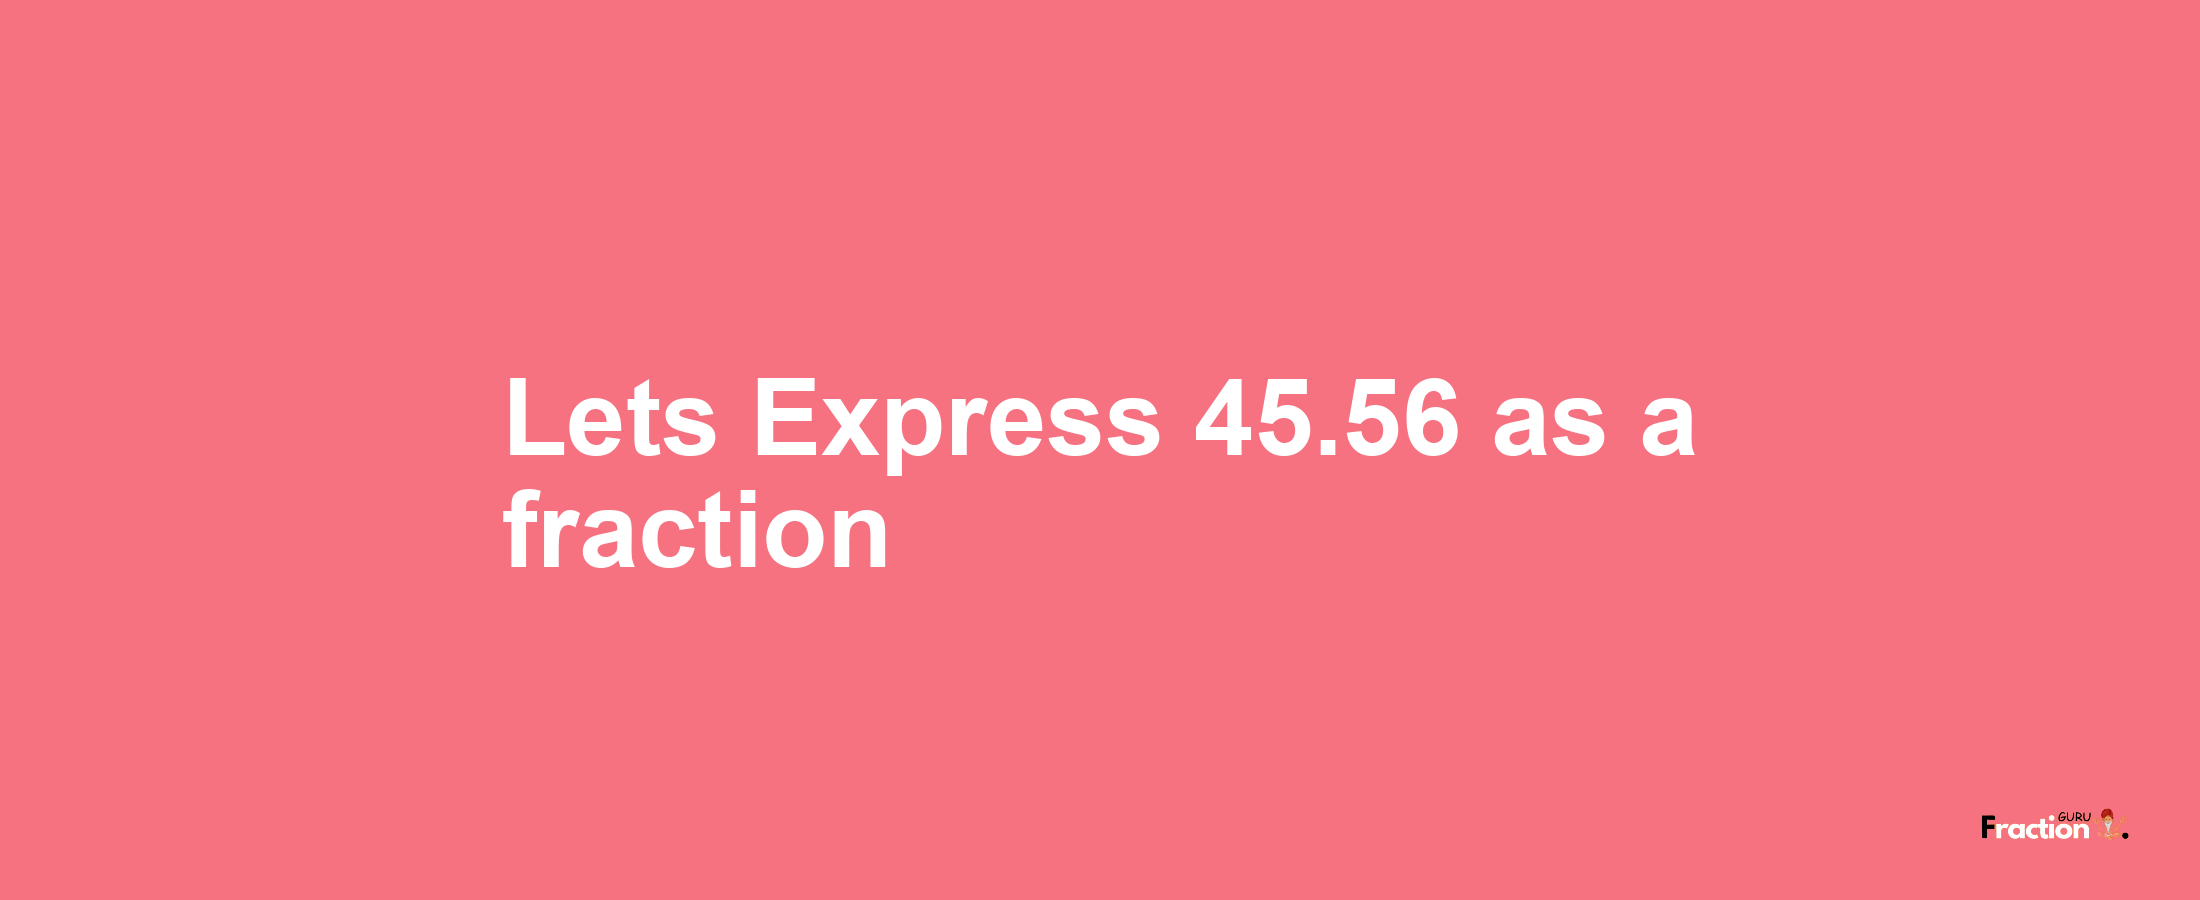 Lets Express 45.56 as afraction